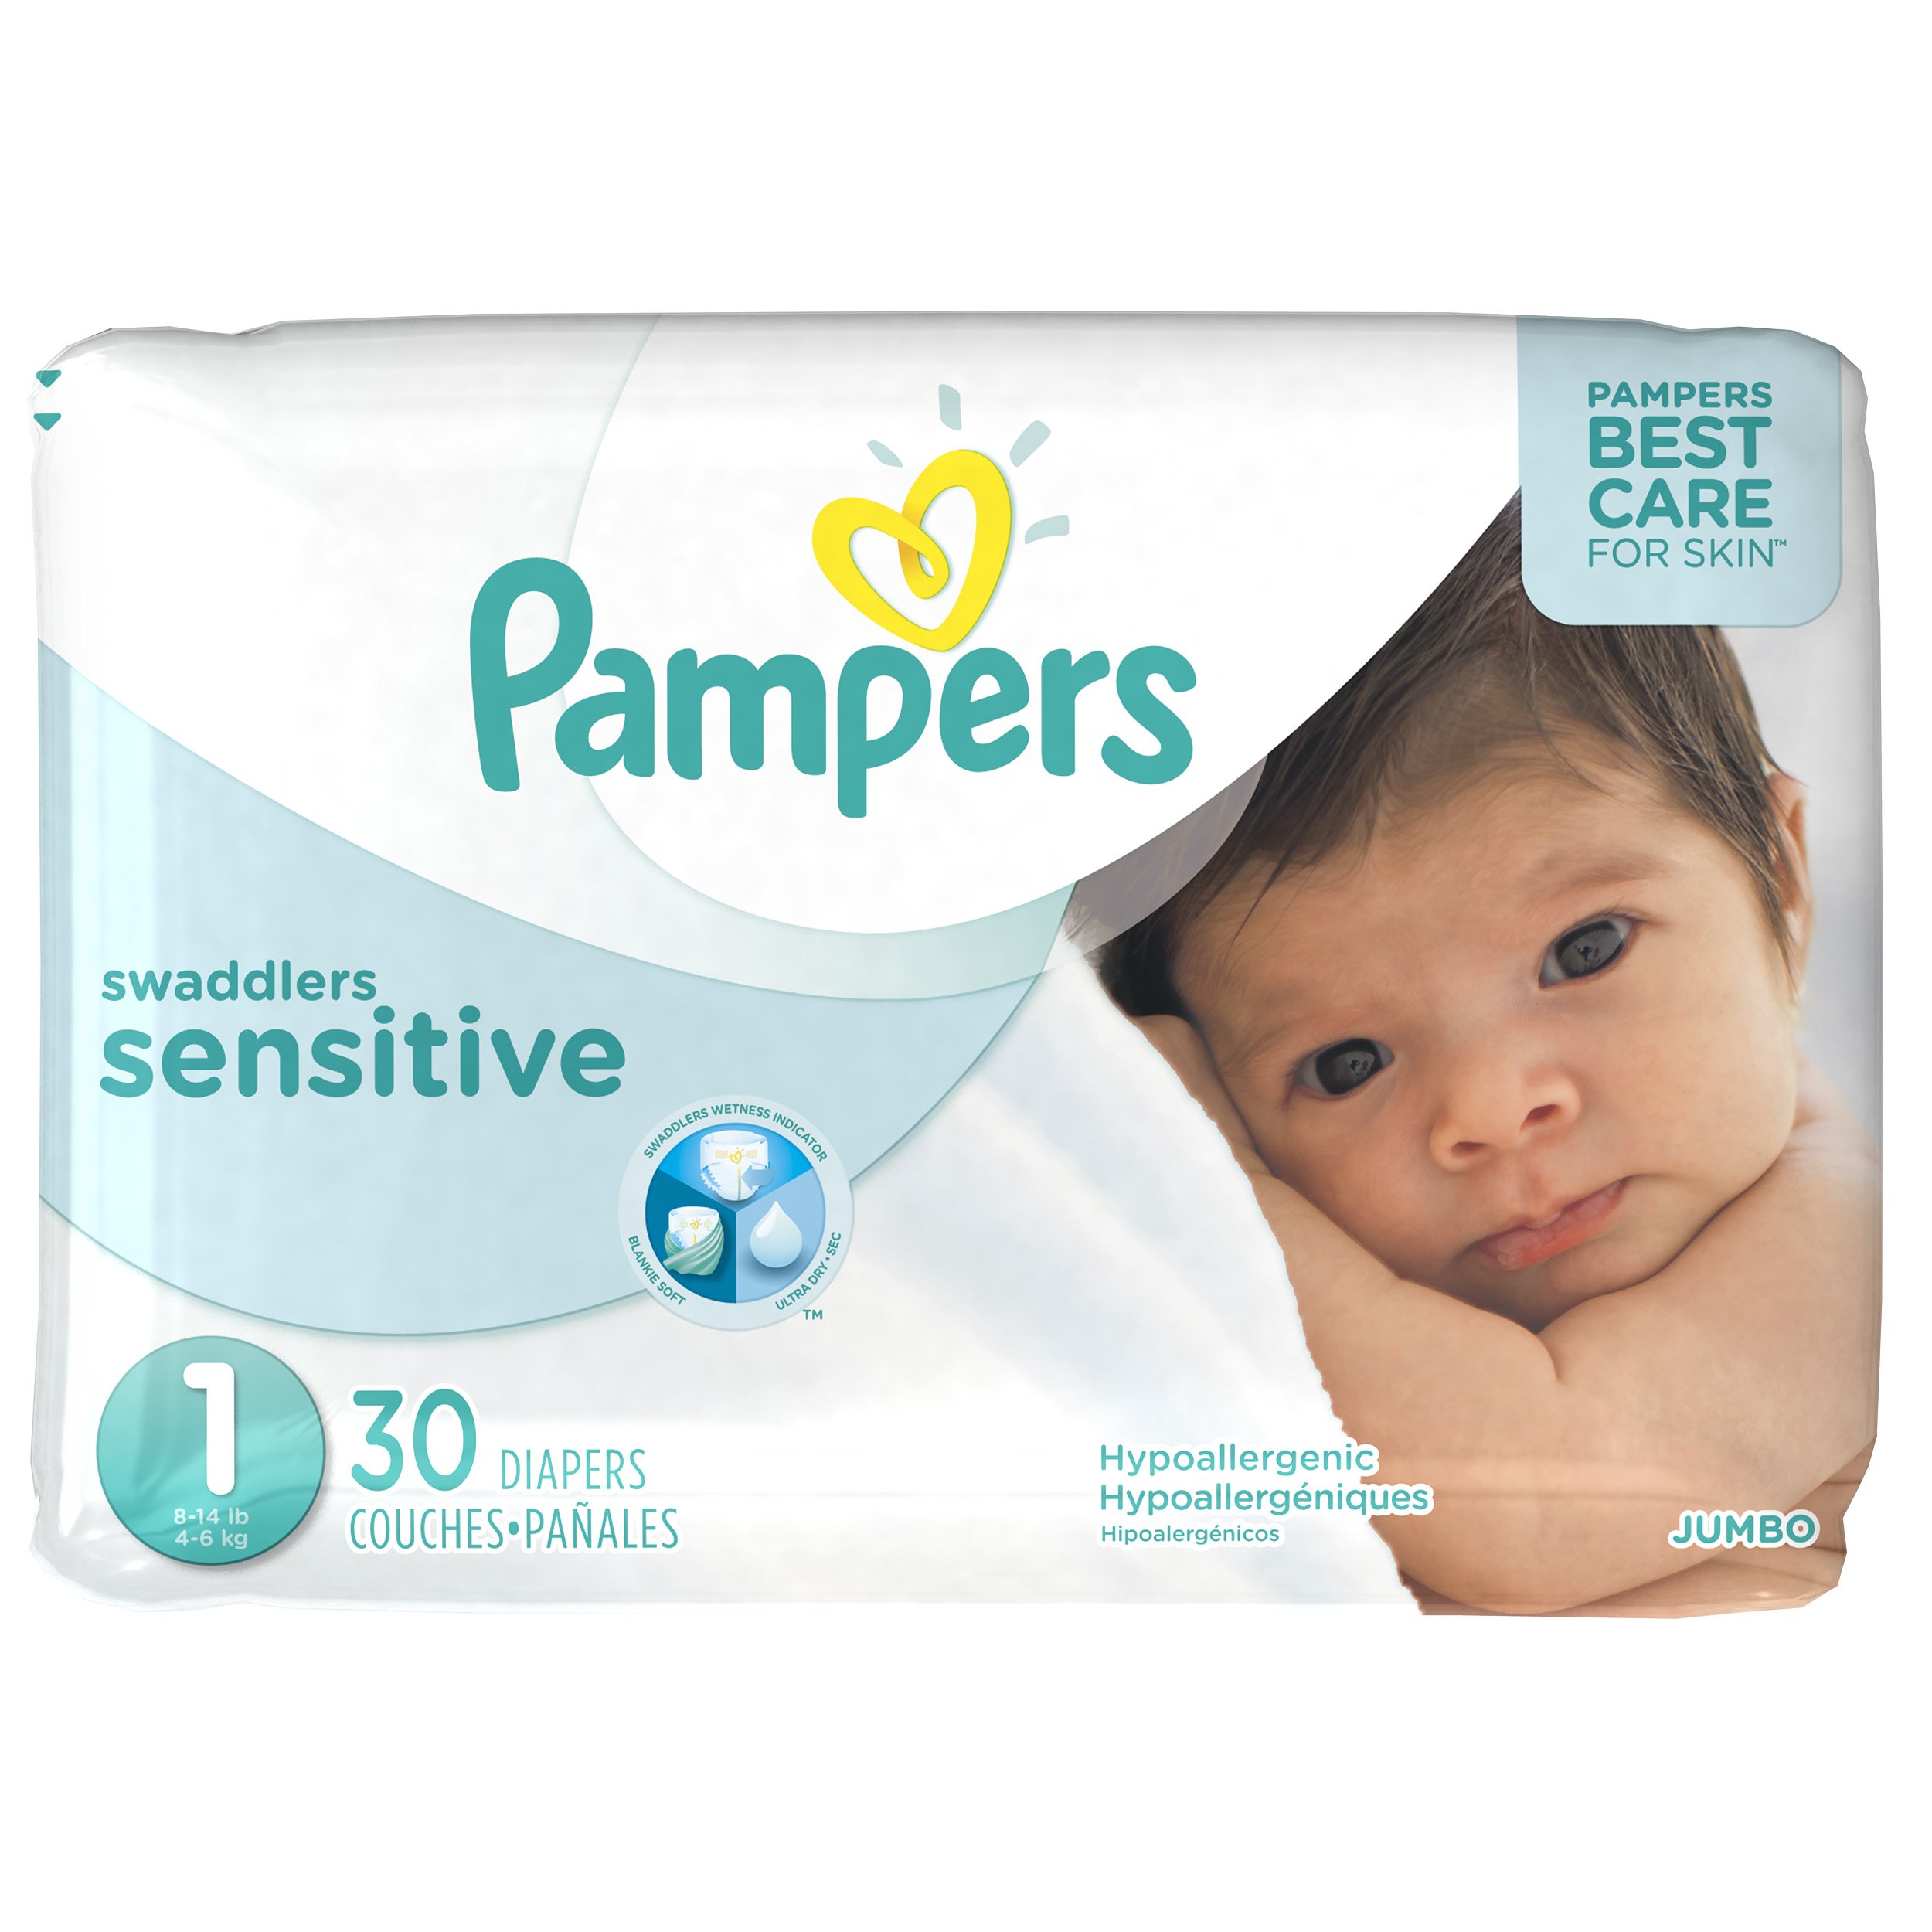 Book Cover Pampers Swaddlers Sensitive Disposable Diapers Newborn Size 1 (8-14 lb), 30 Count, JUMBO Size 1 (30 Count) Jumbo